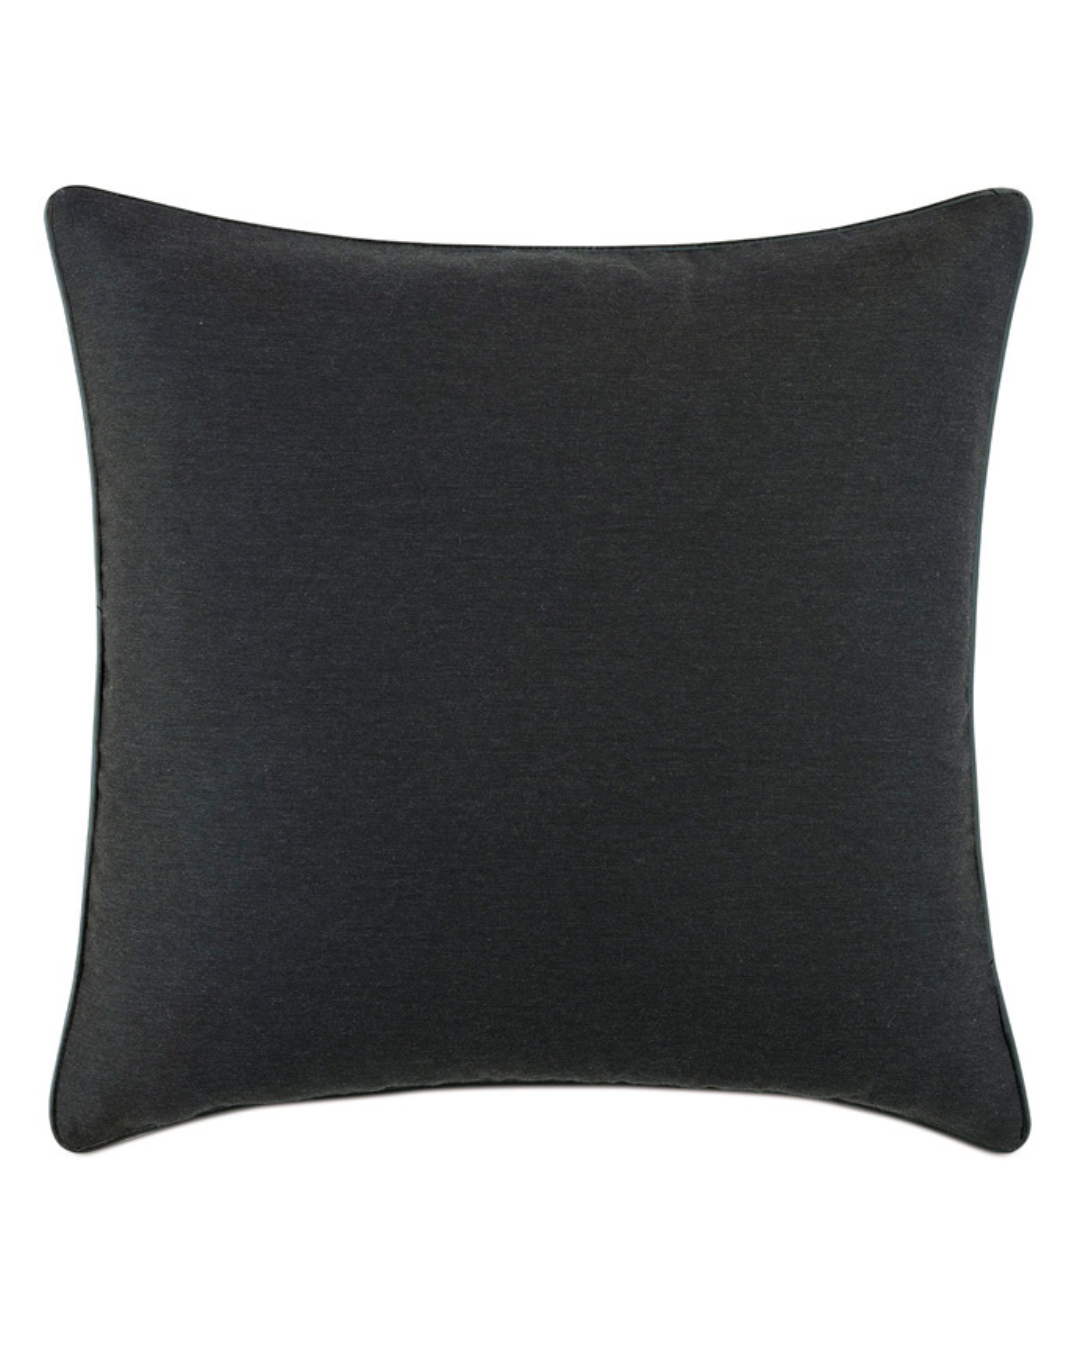 A square, dark gray pillow with a smooth texture and a contemporary aesthetic. The pillow's simple design and monochromatic color make it versatile for various interior decorations. Measuring 27x27 in size, it appears plush and comfortable, perfect as the SOLID EURO SHAM IN BLACK 27x27 by Eastern Accents addition to your space.